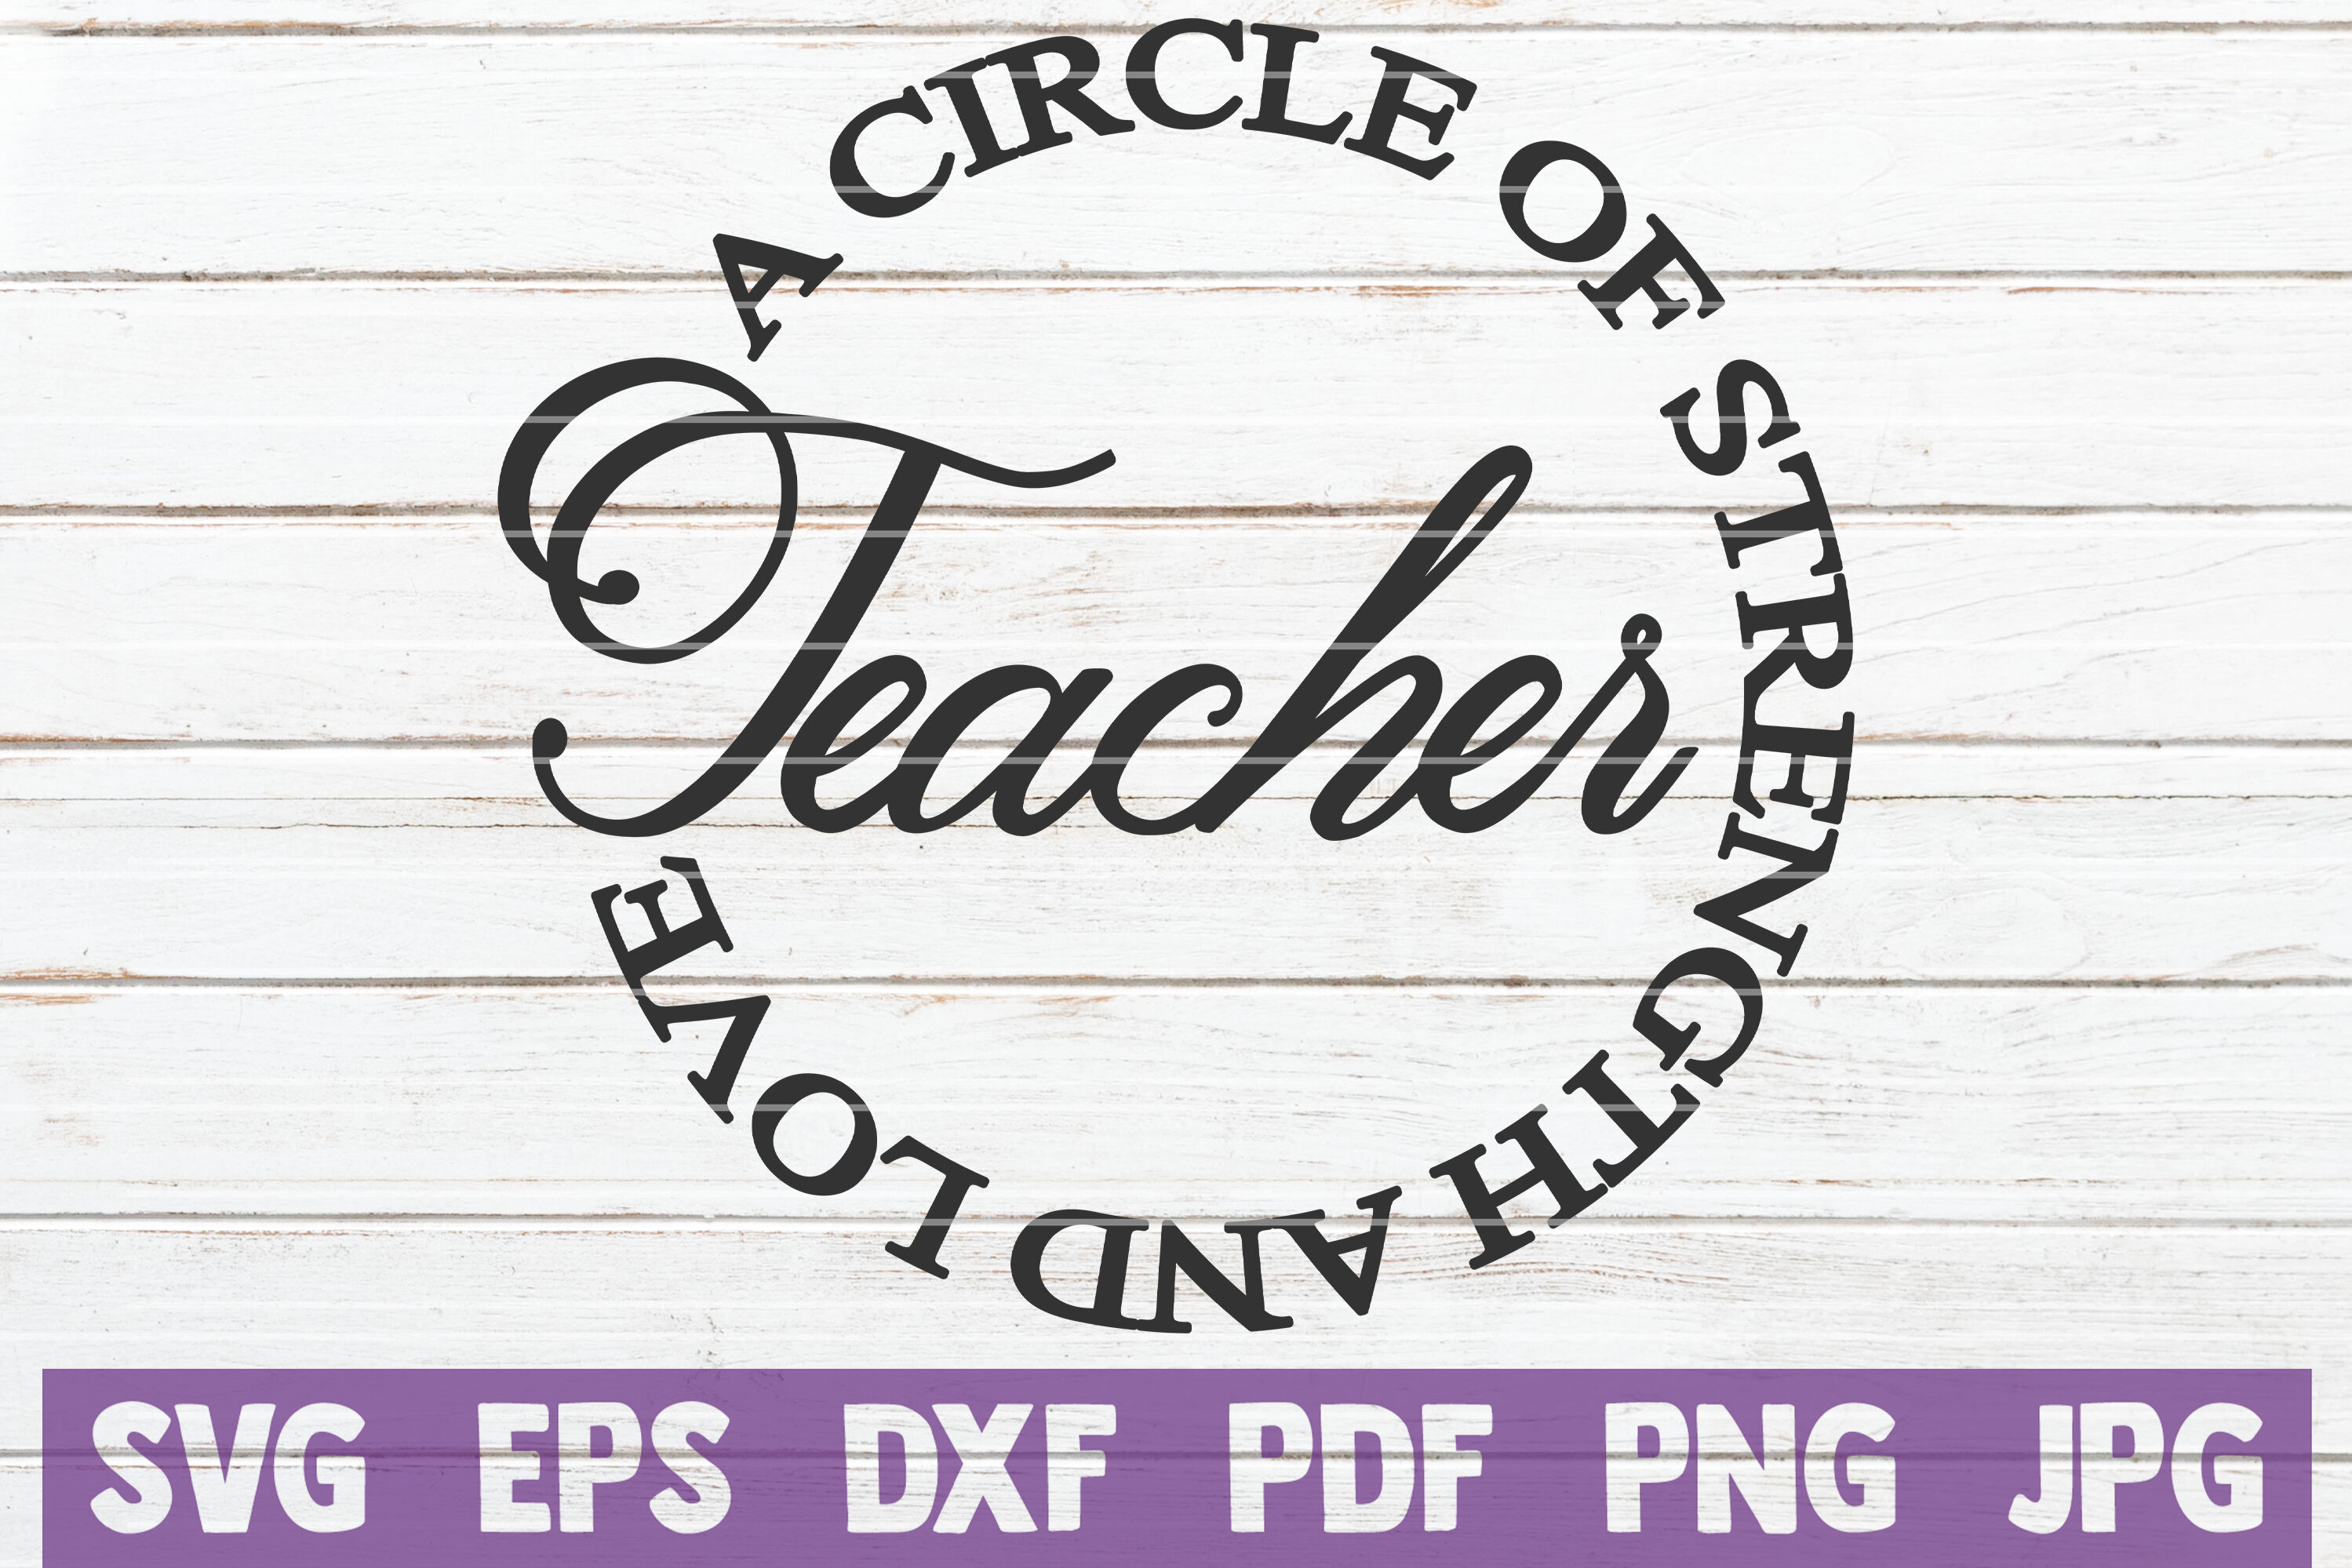 Download Teacher A Circle Of Strength And Love Svg Cut File By Mintymarshmallows Thehungryjpeg Com